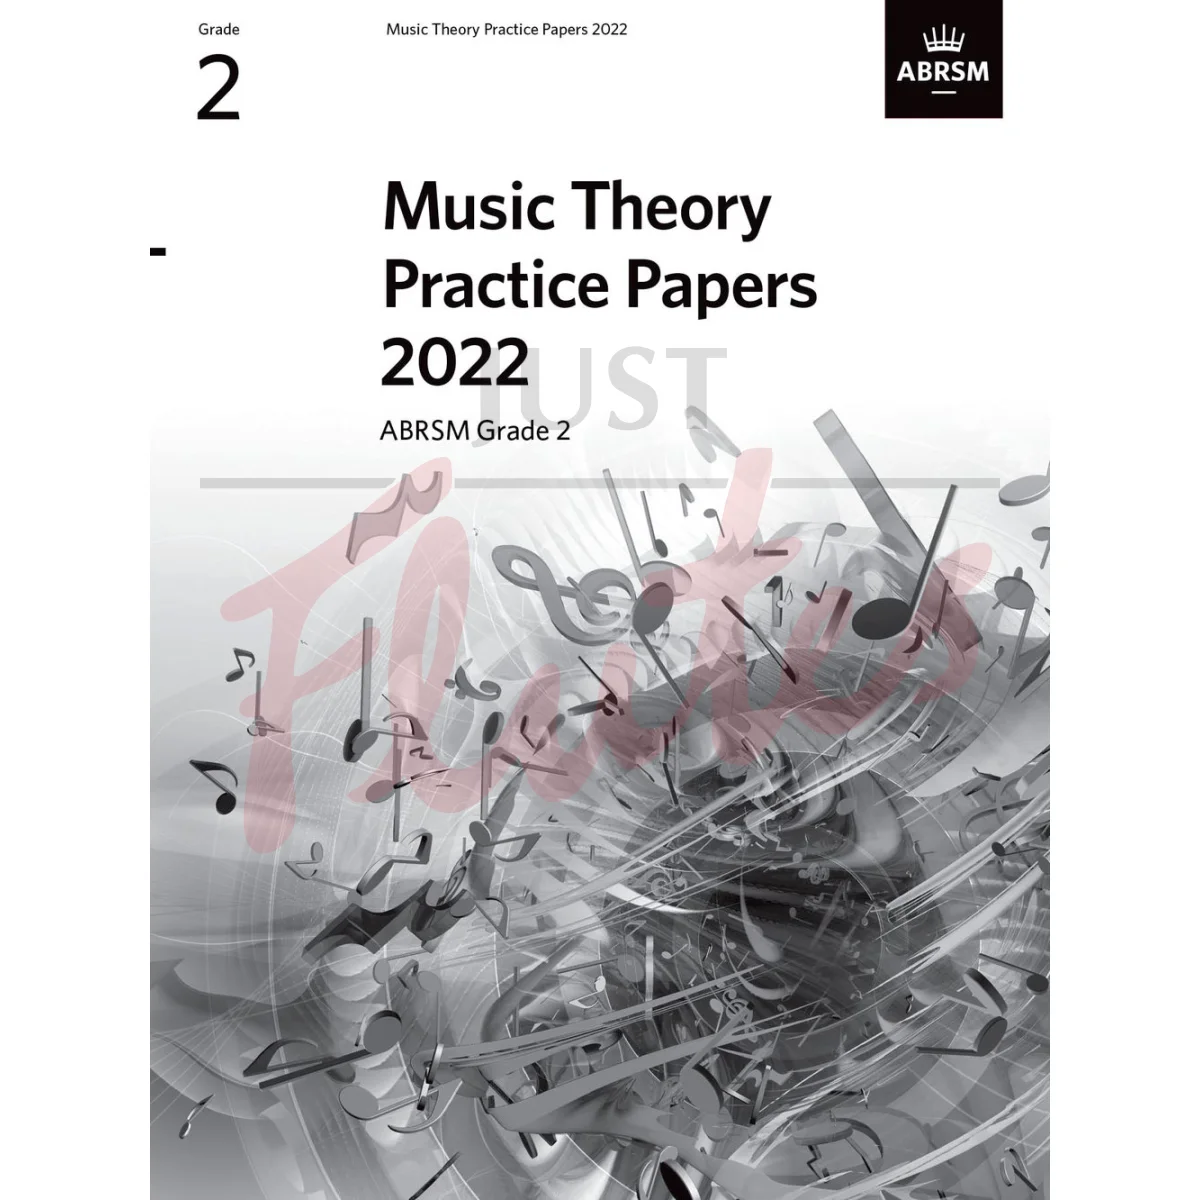 Music Theory Practice Papers 2022 Grade 2